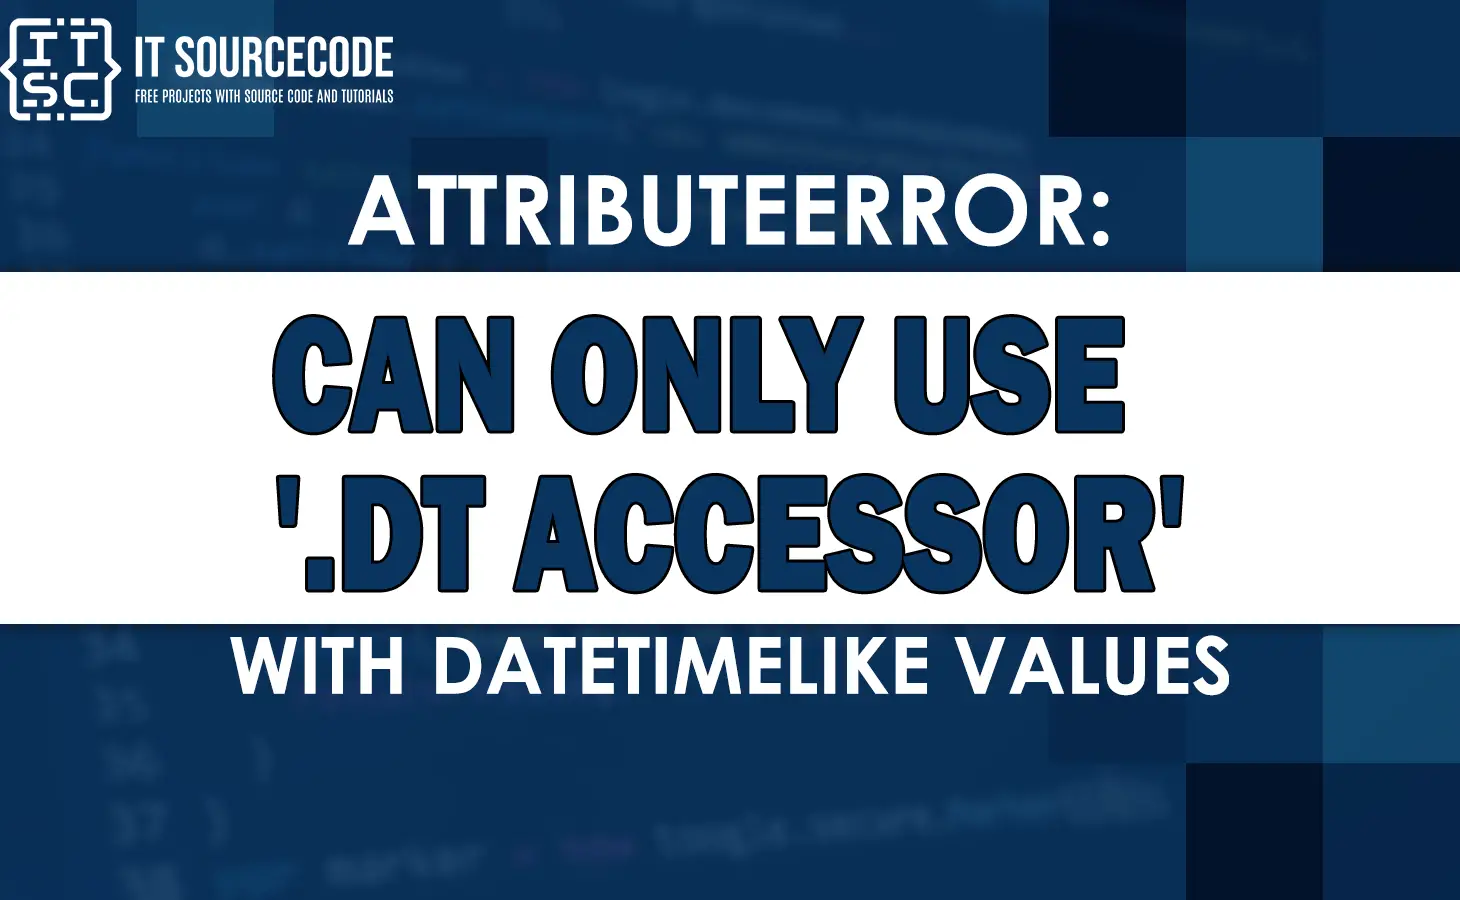 attributeerror can only use .dt accessor with datetimelike values